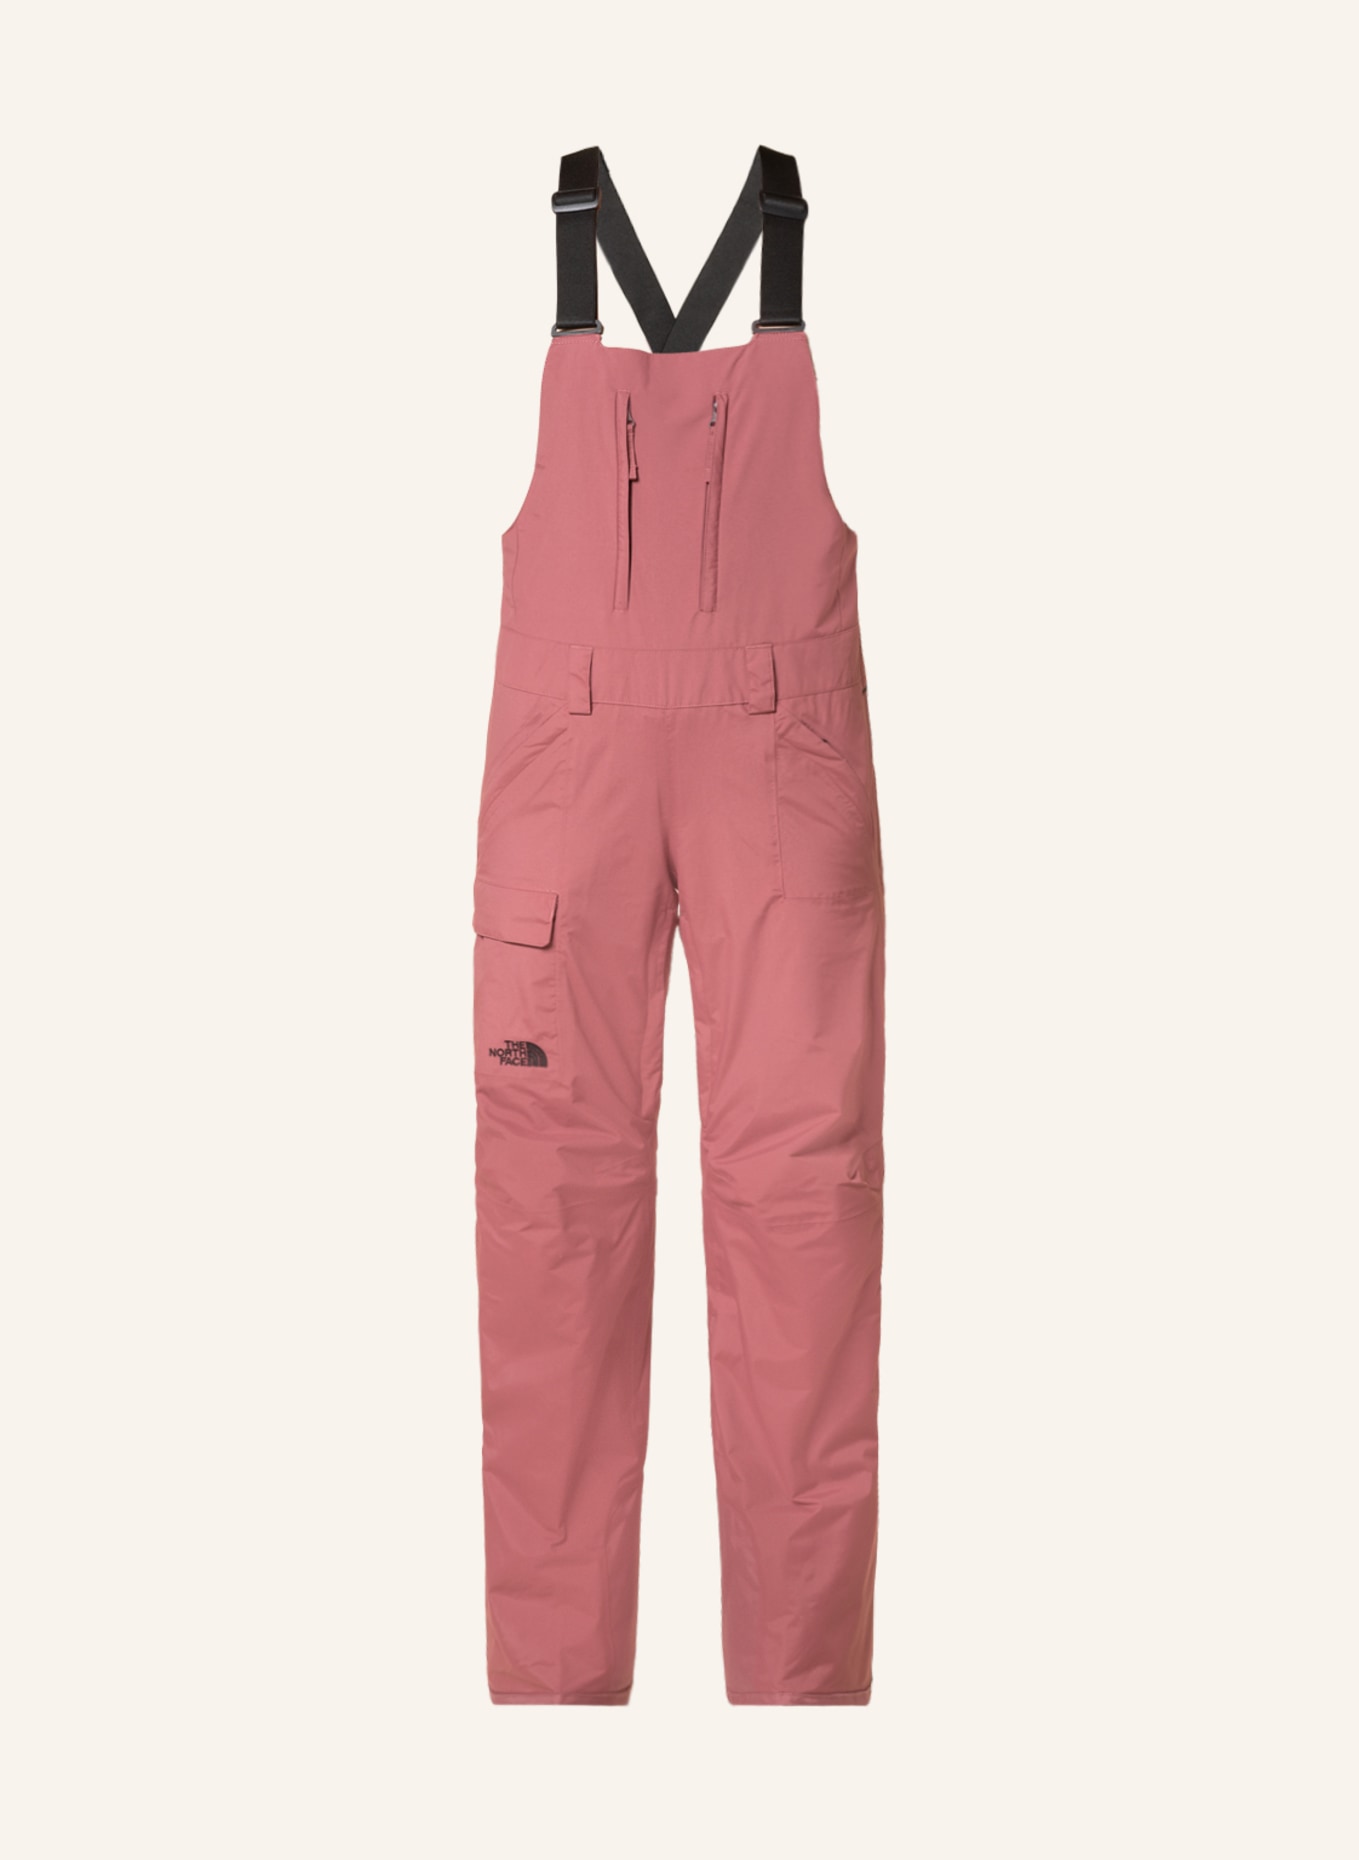 THE NORTH FACE Ski pants FREEDOM in light red